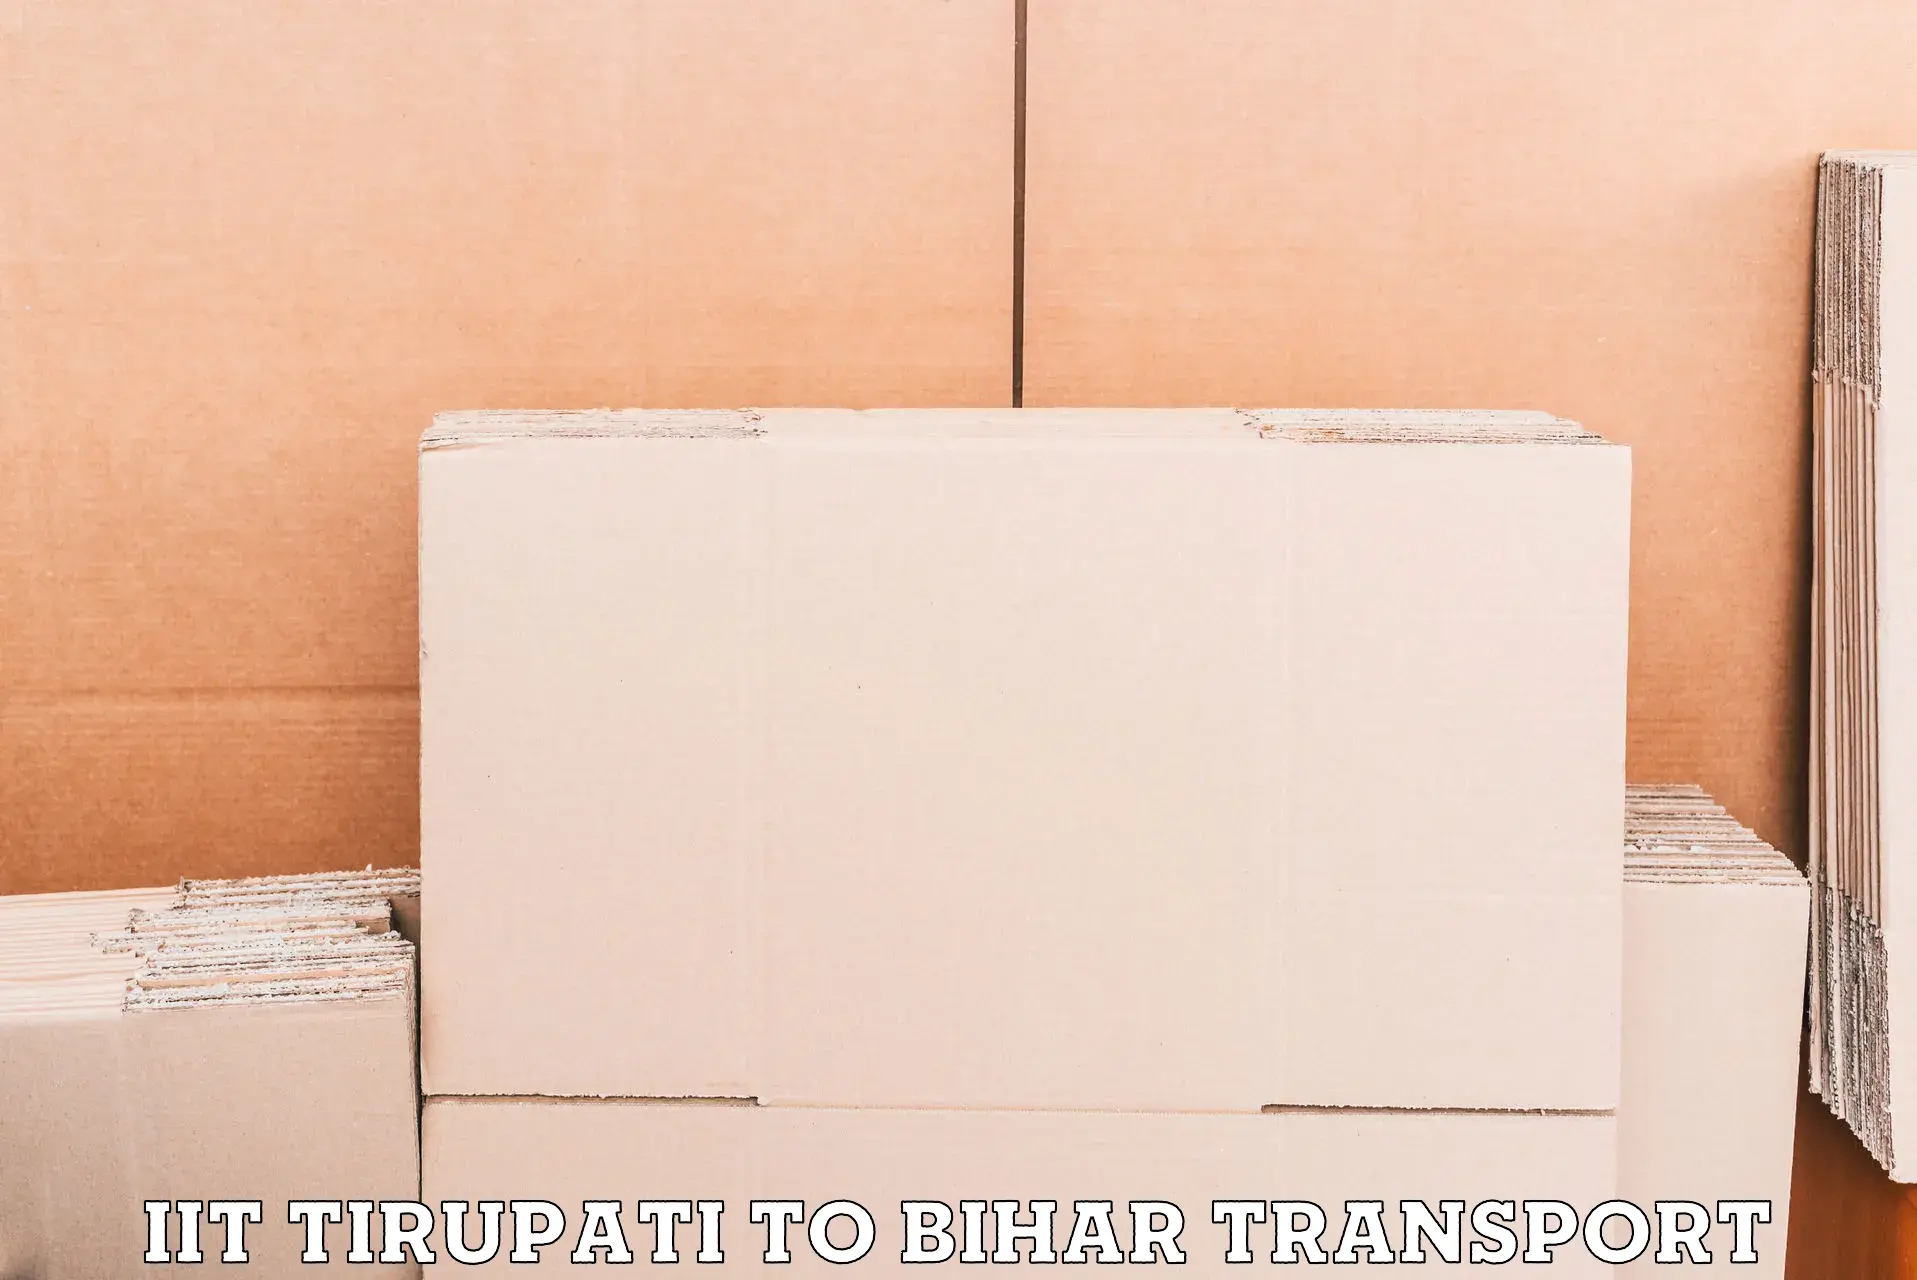 Commercial transport service IIT Tirupati to Gauripur